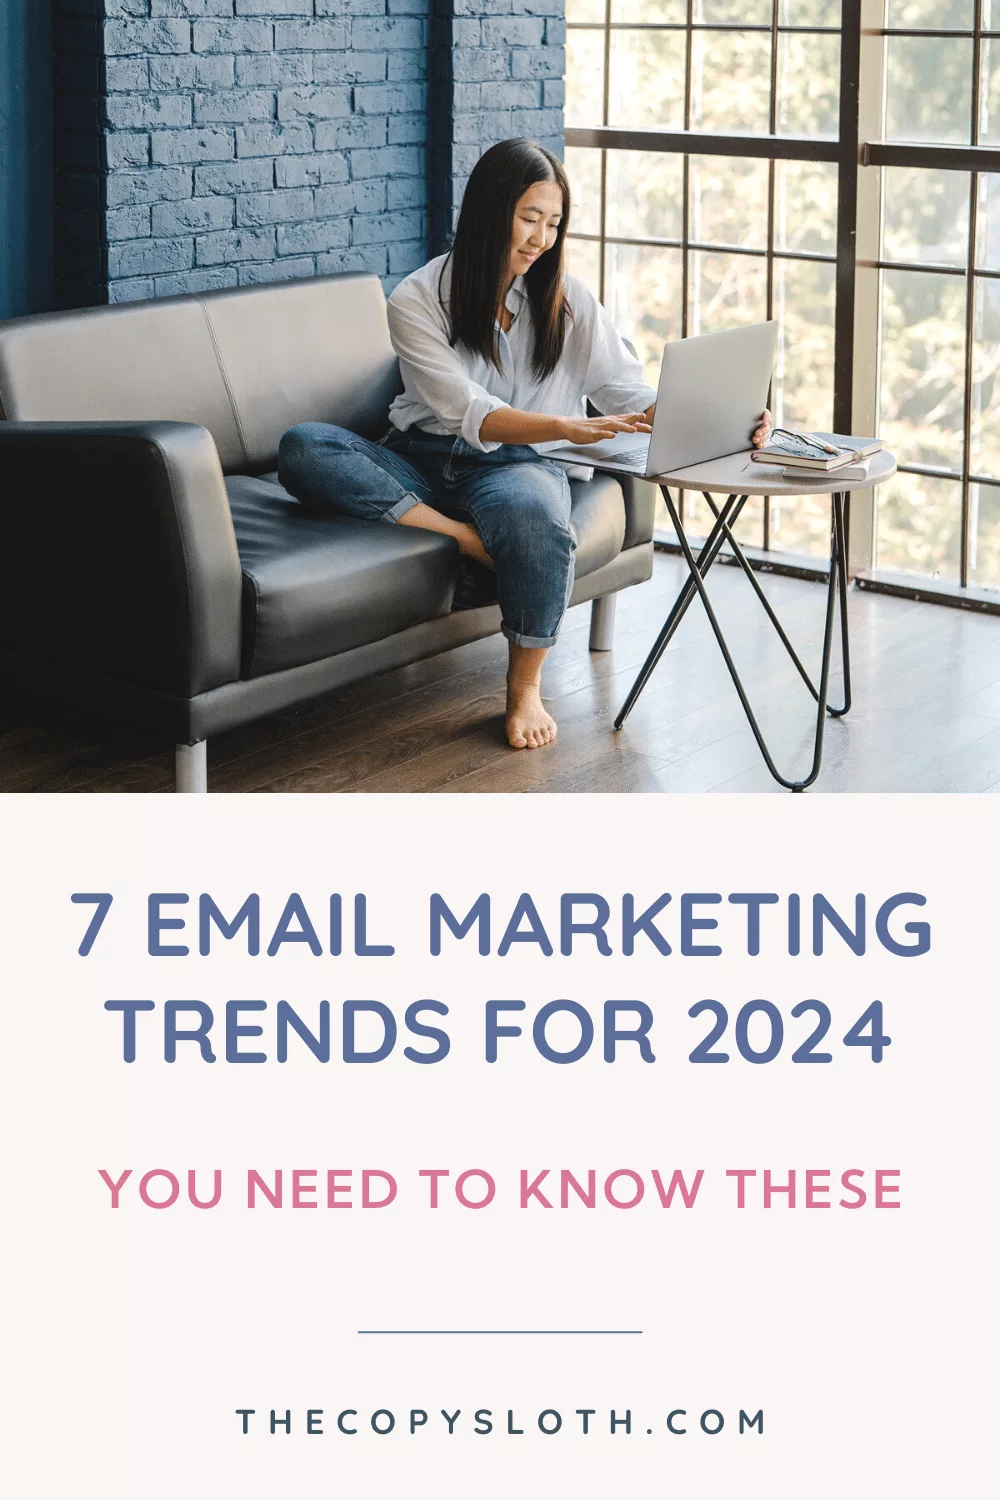 Important email marketing trends for 2014 you need to know.